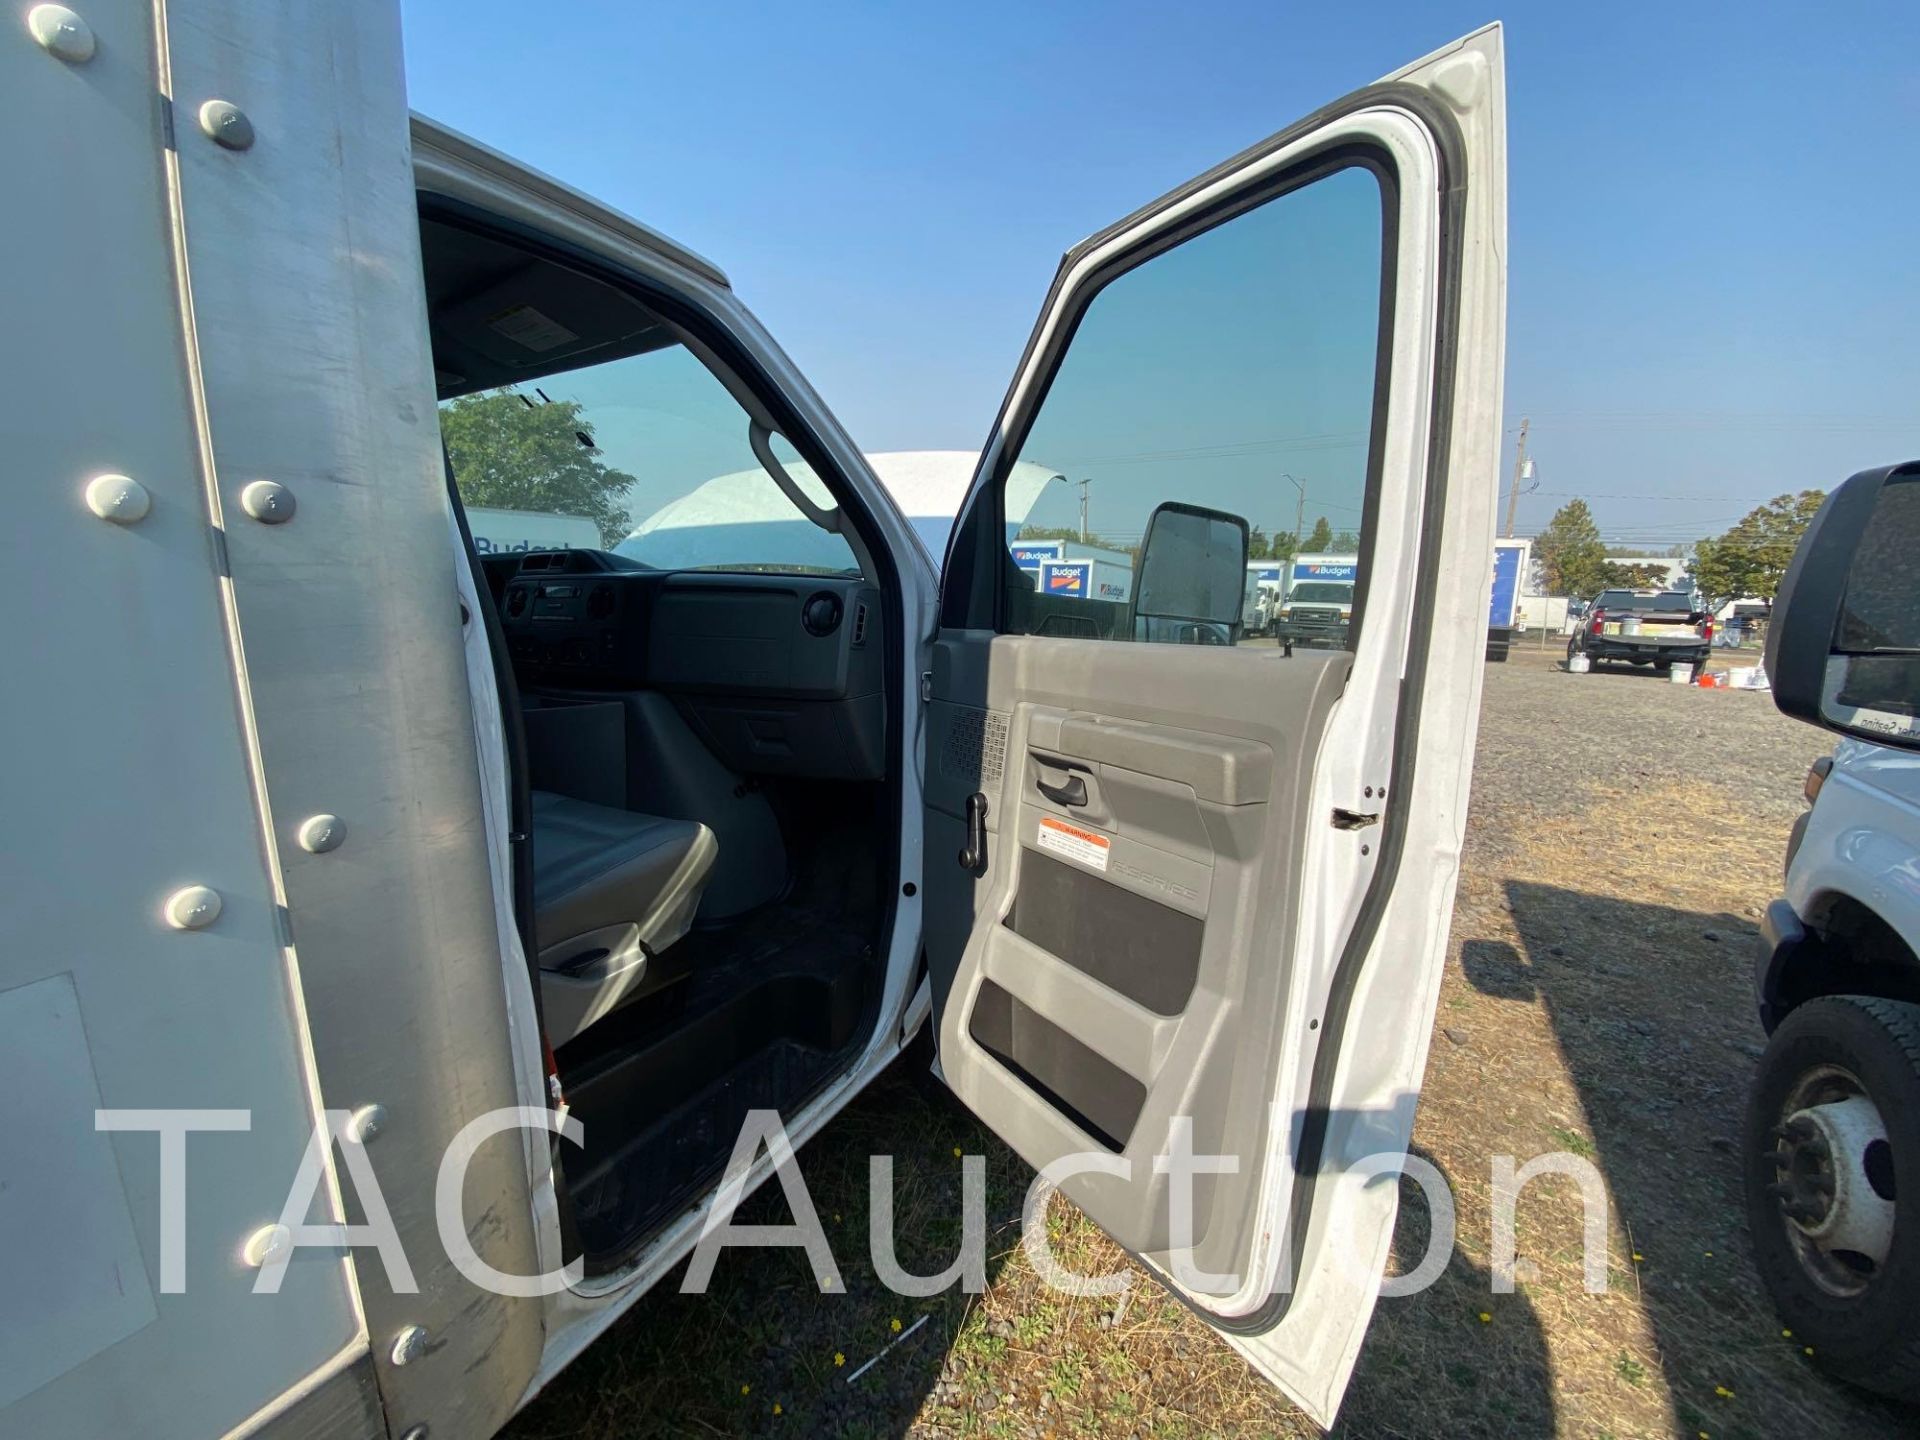 2015 Ford E-350 16ft Box Truck - Image 54 of 106